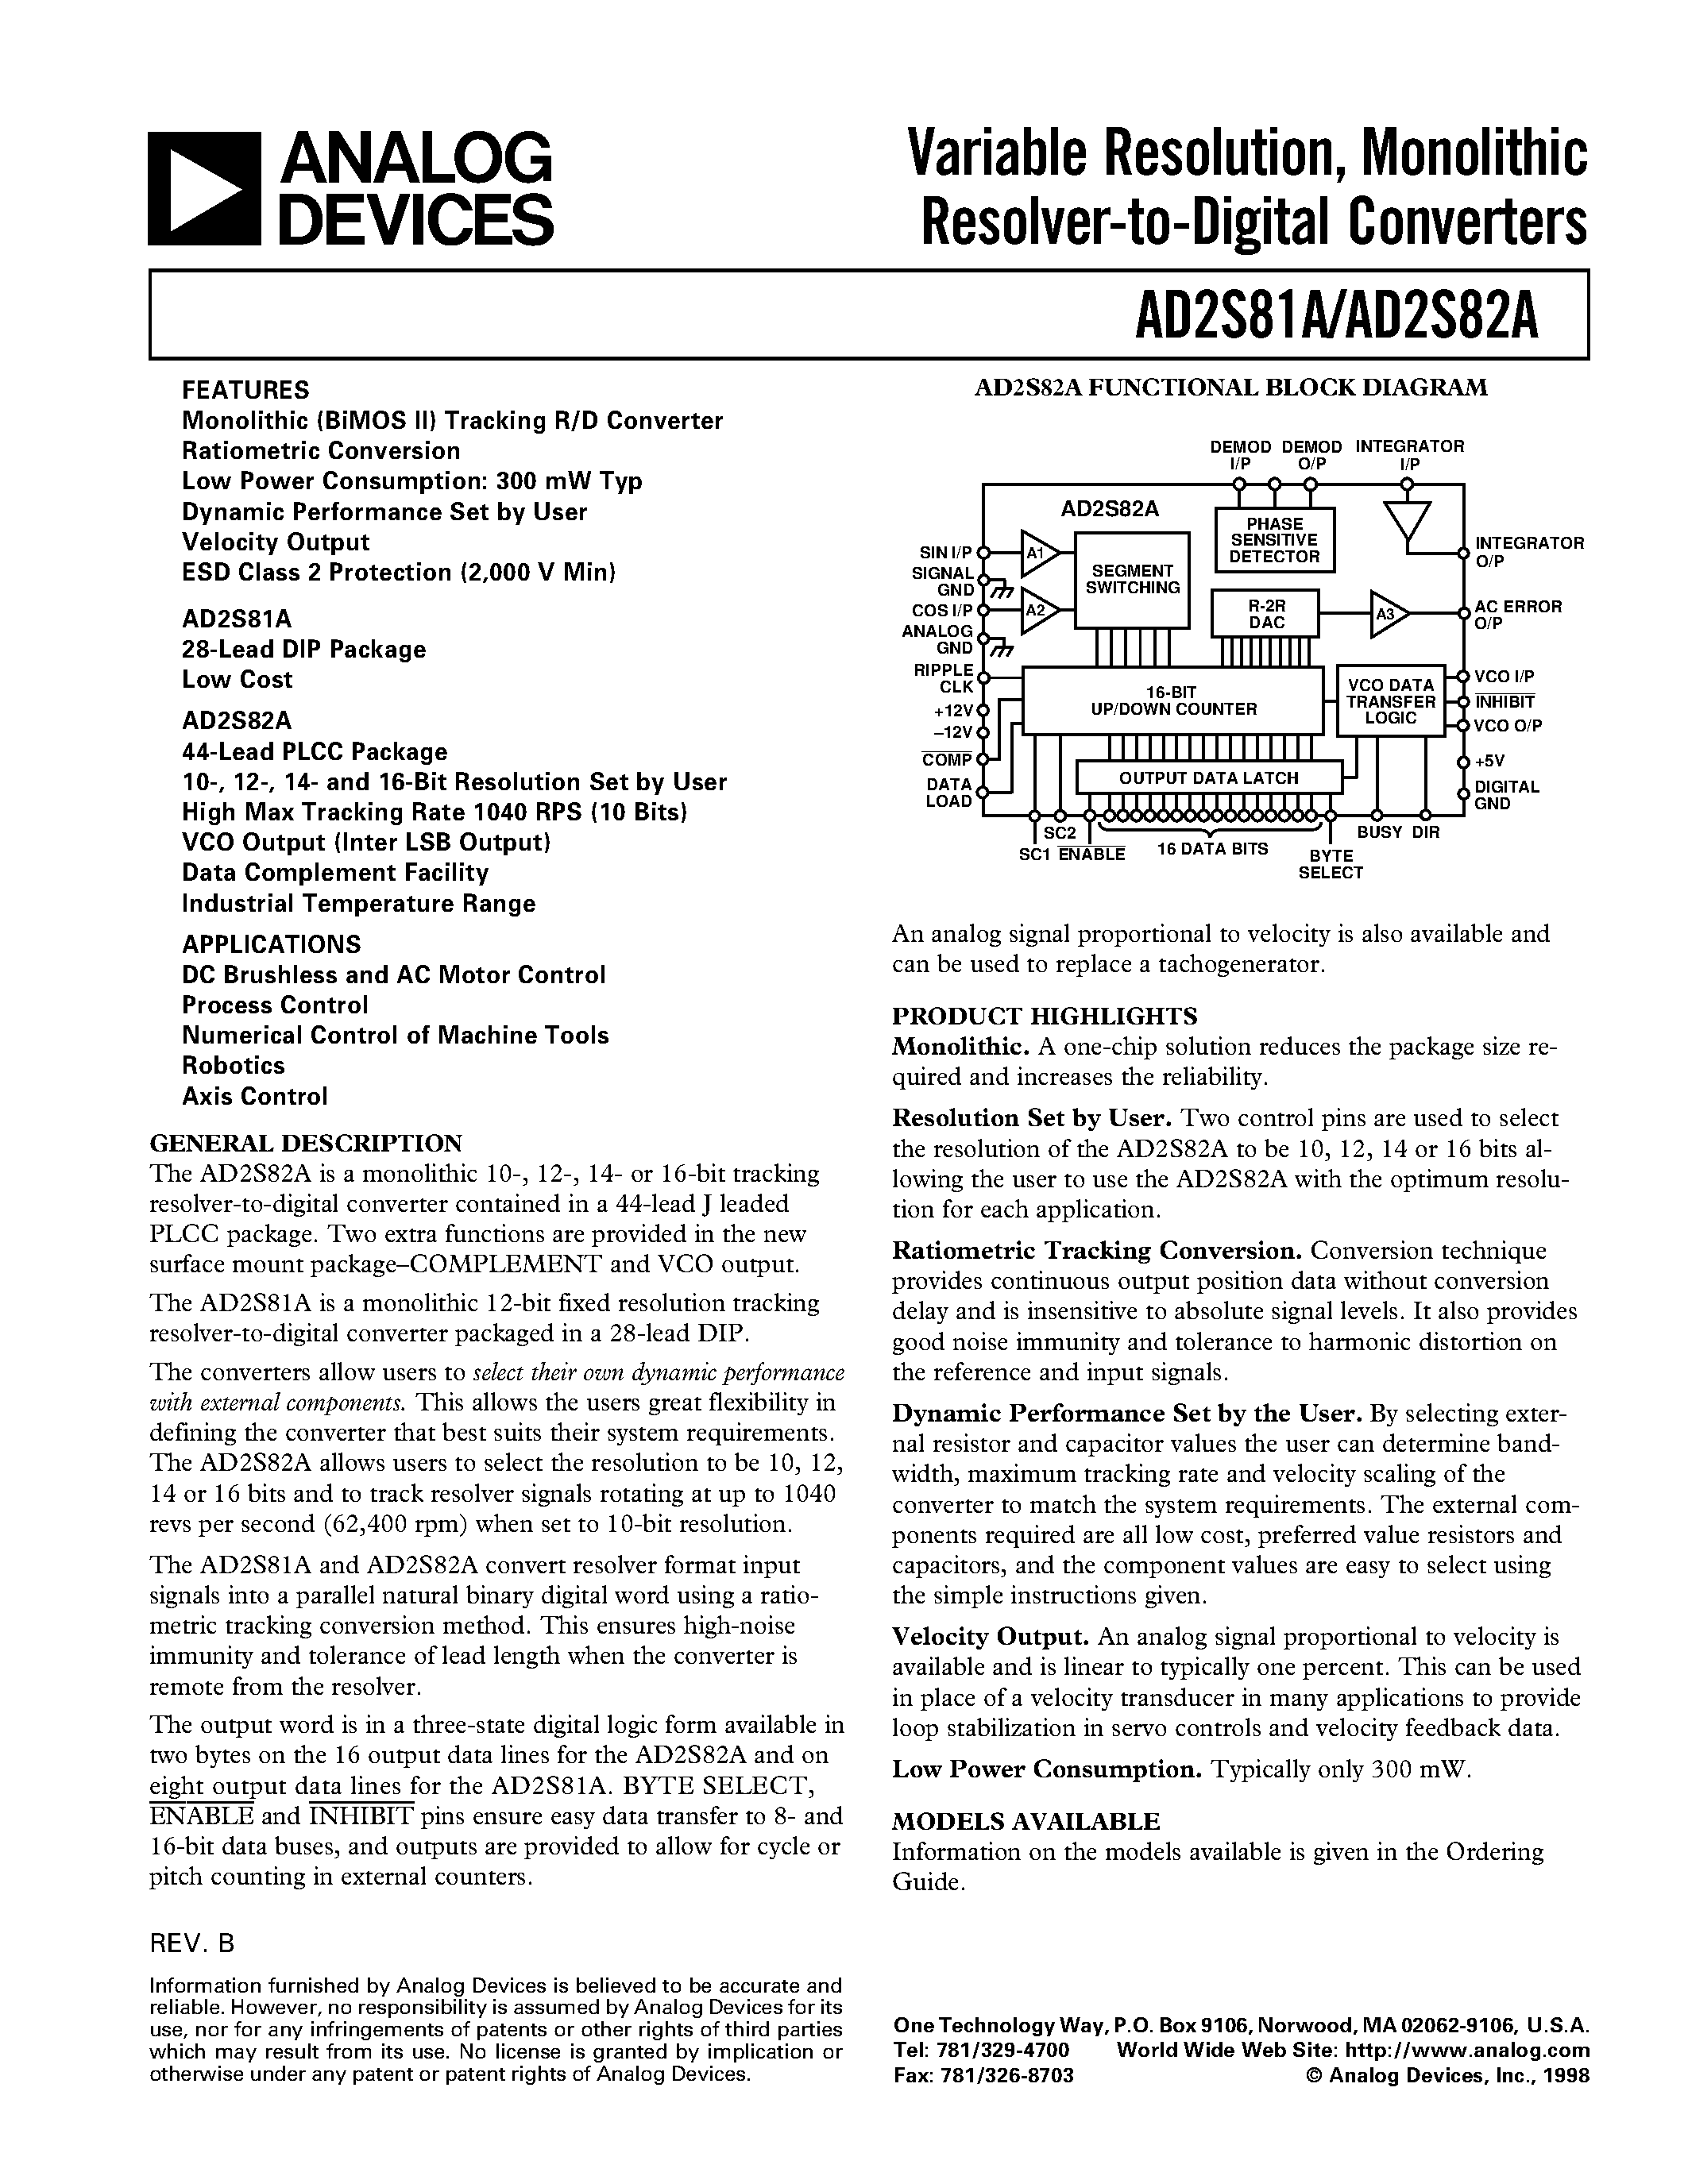 Datasheet AD2S82AHP - Variable Resolution/ Monolithic Resolver-to-Digital Converters page 1